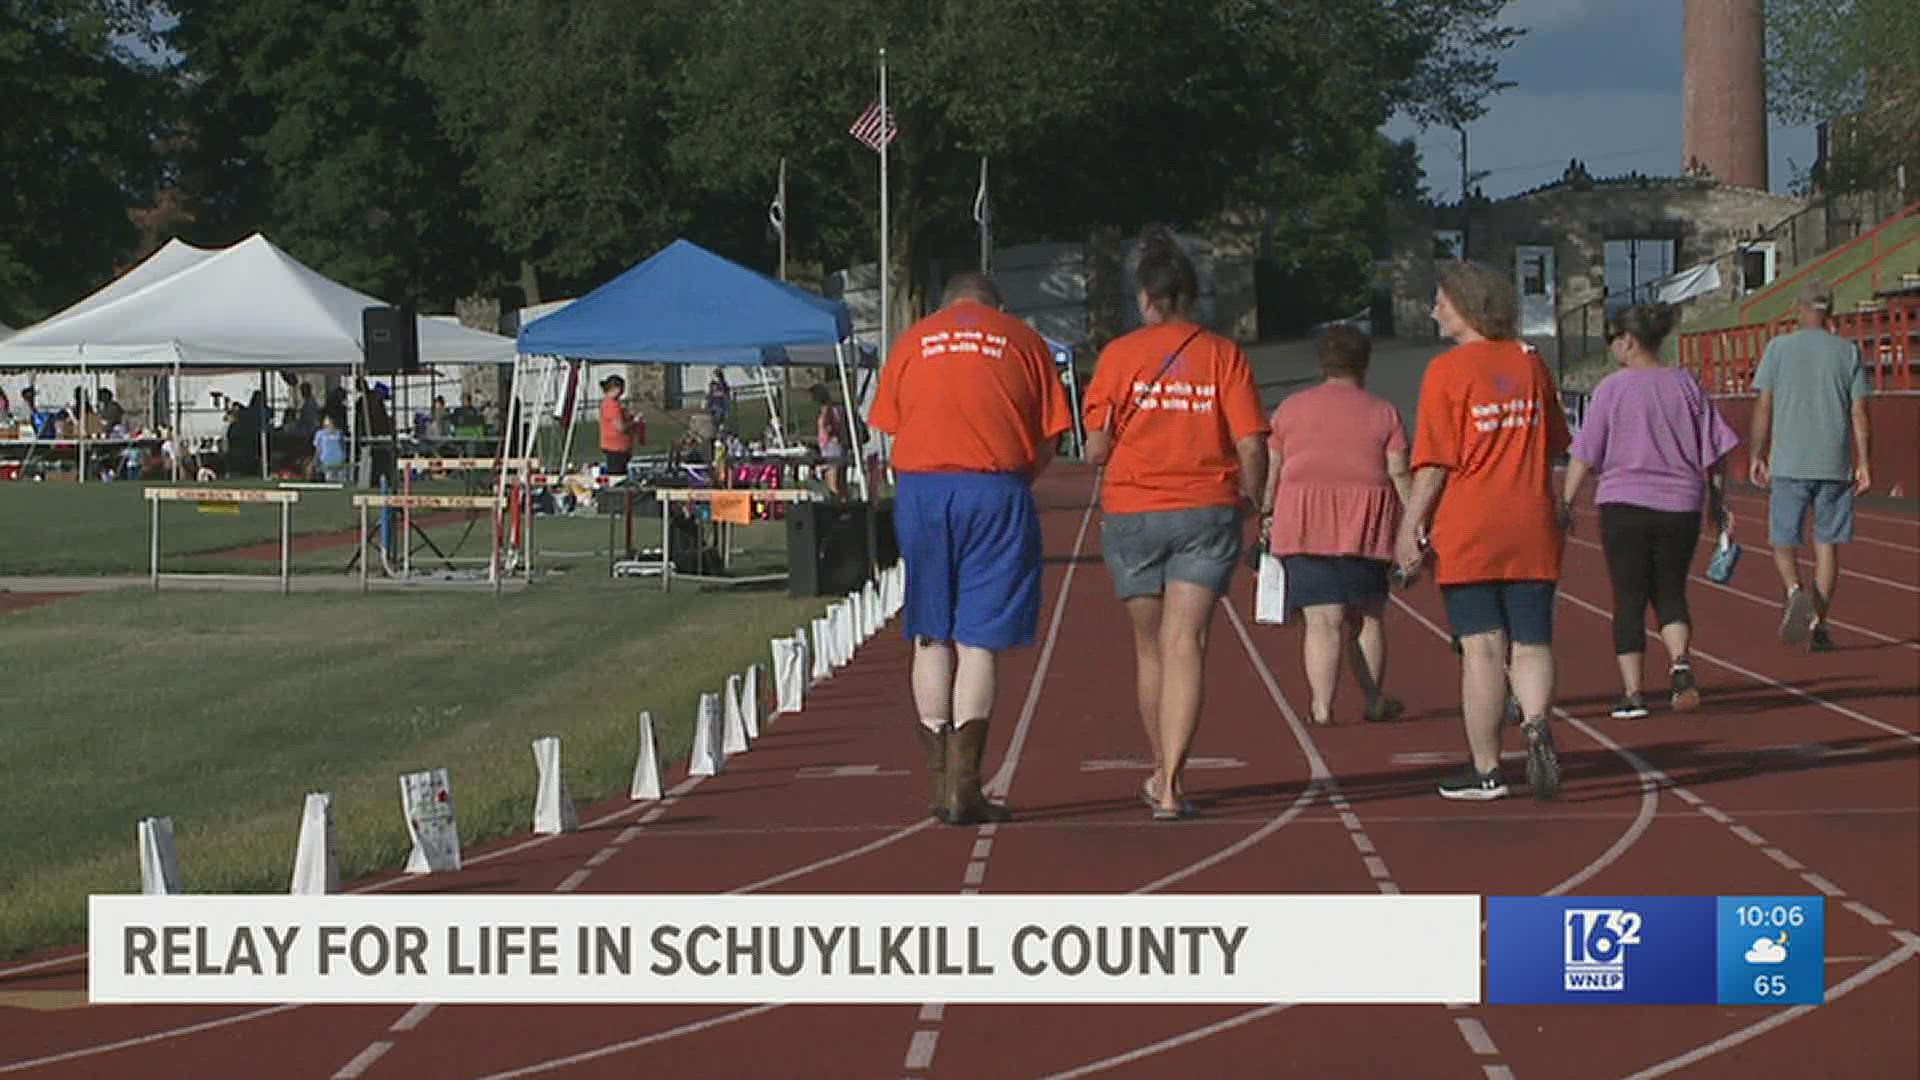 Schuylkill County Relay for Life draws more than 150 people to track in Pottsville.